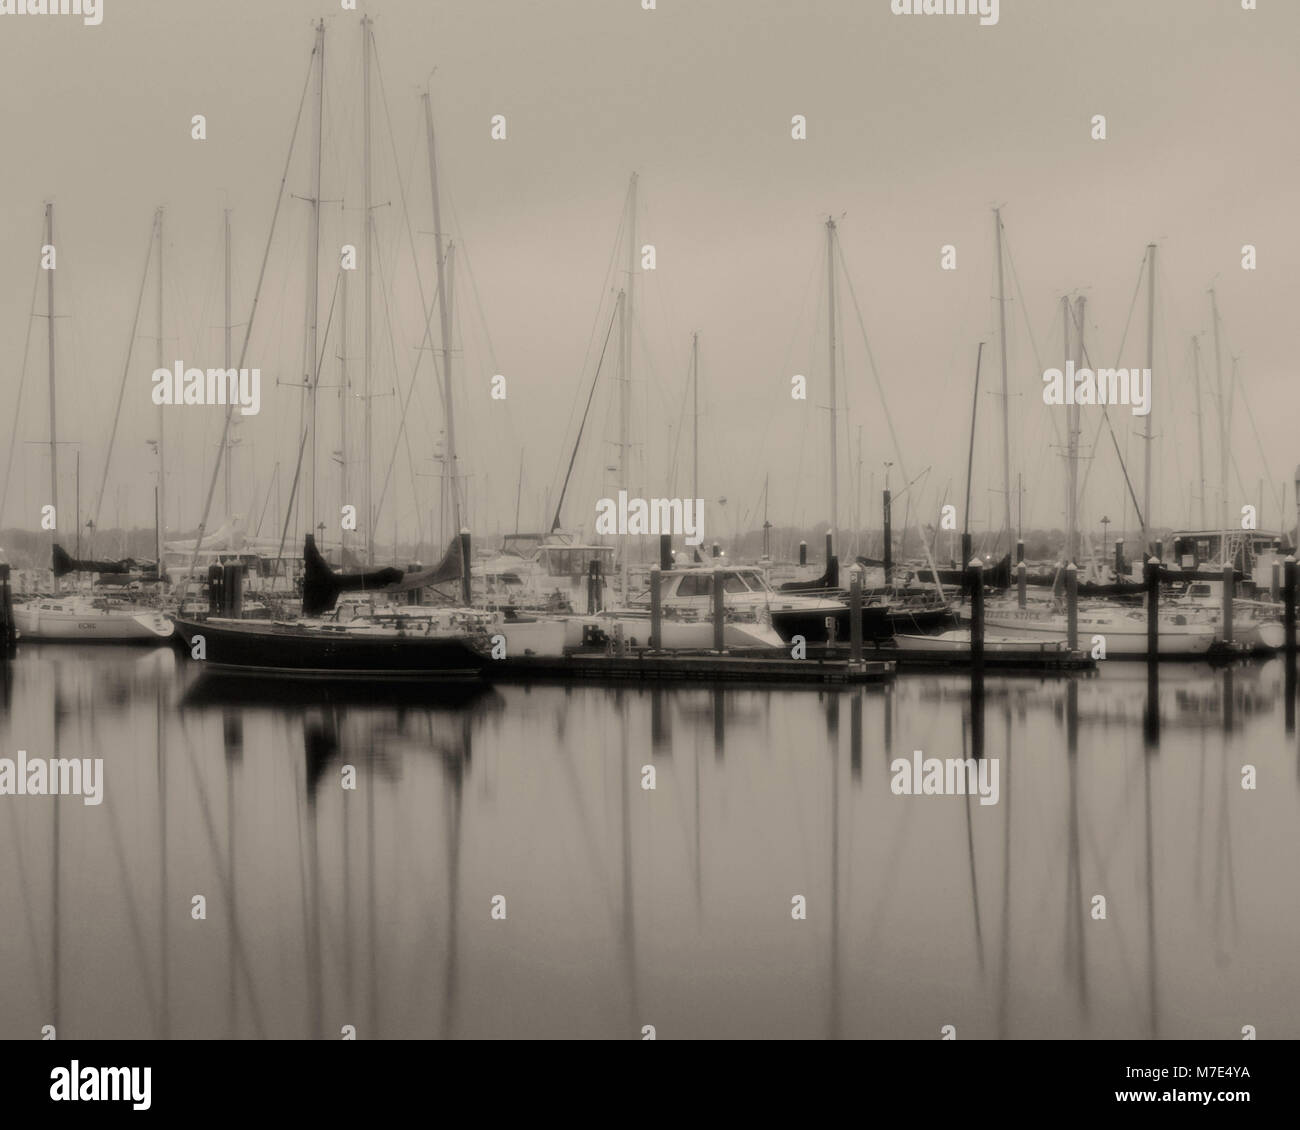 Sailboats docked during a foggy morning in historic Newport, Rhode Island, USA Stock Photo